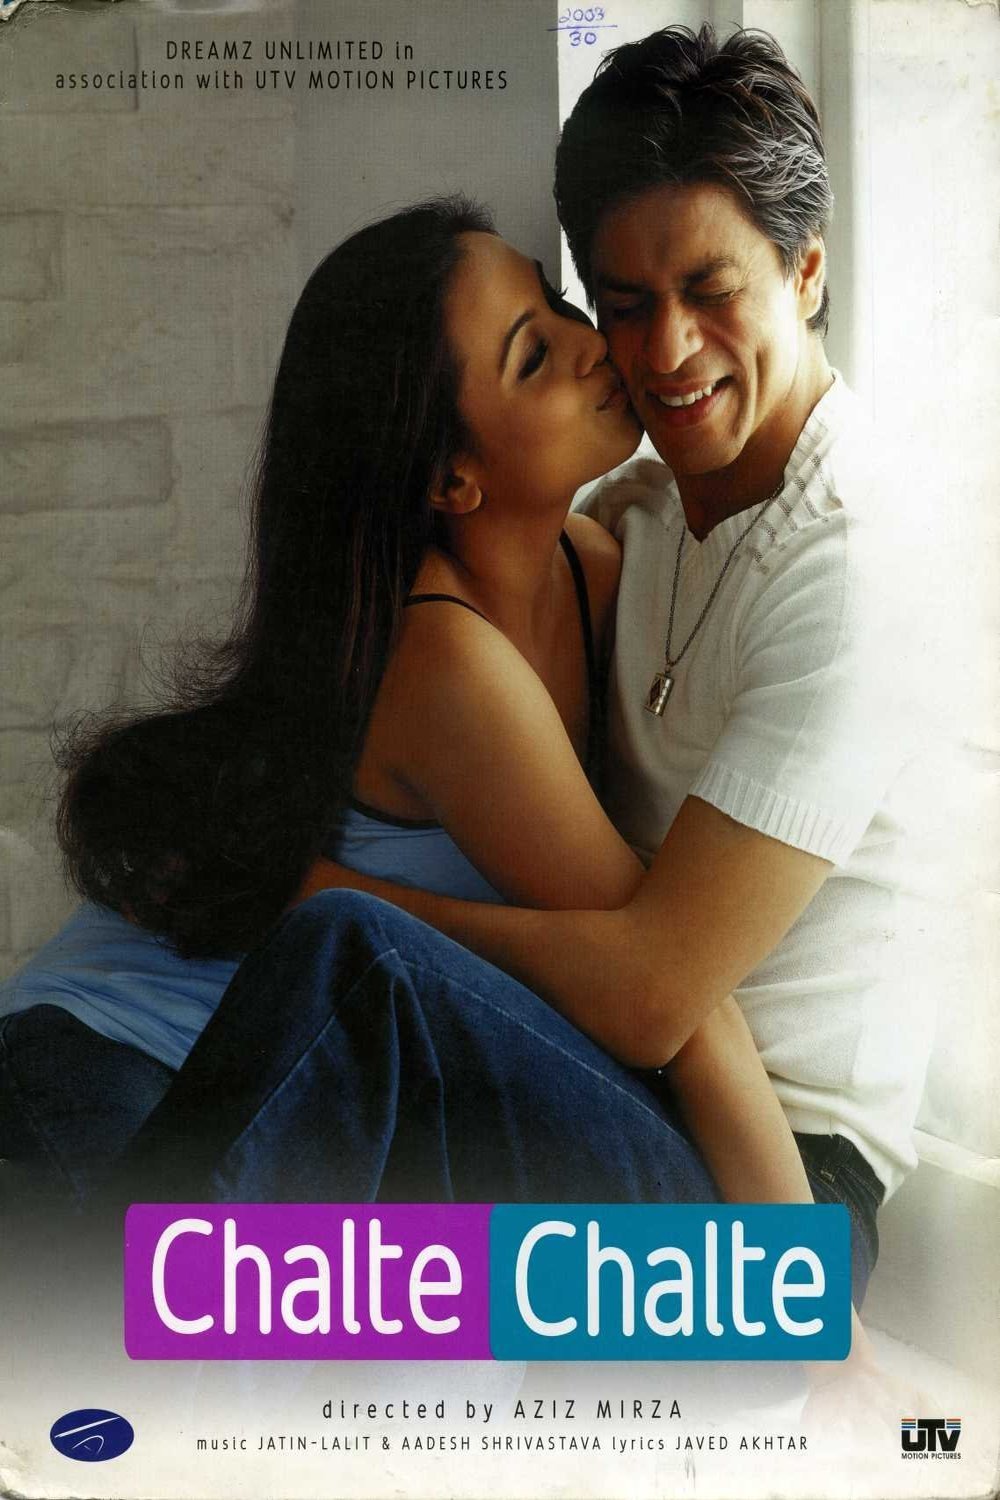 Hindi poster of the movie Chalte Chalte